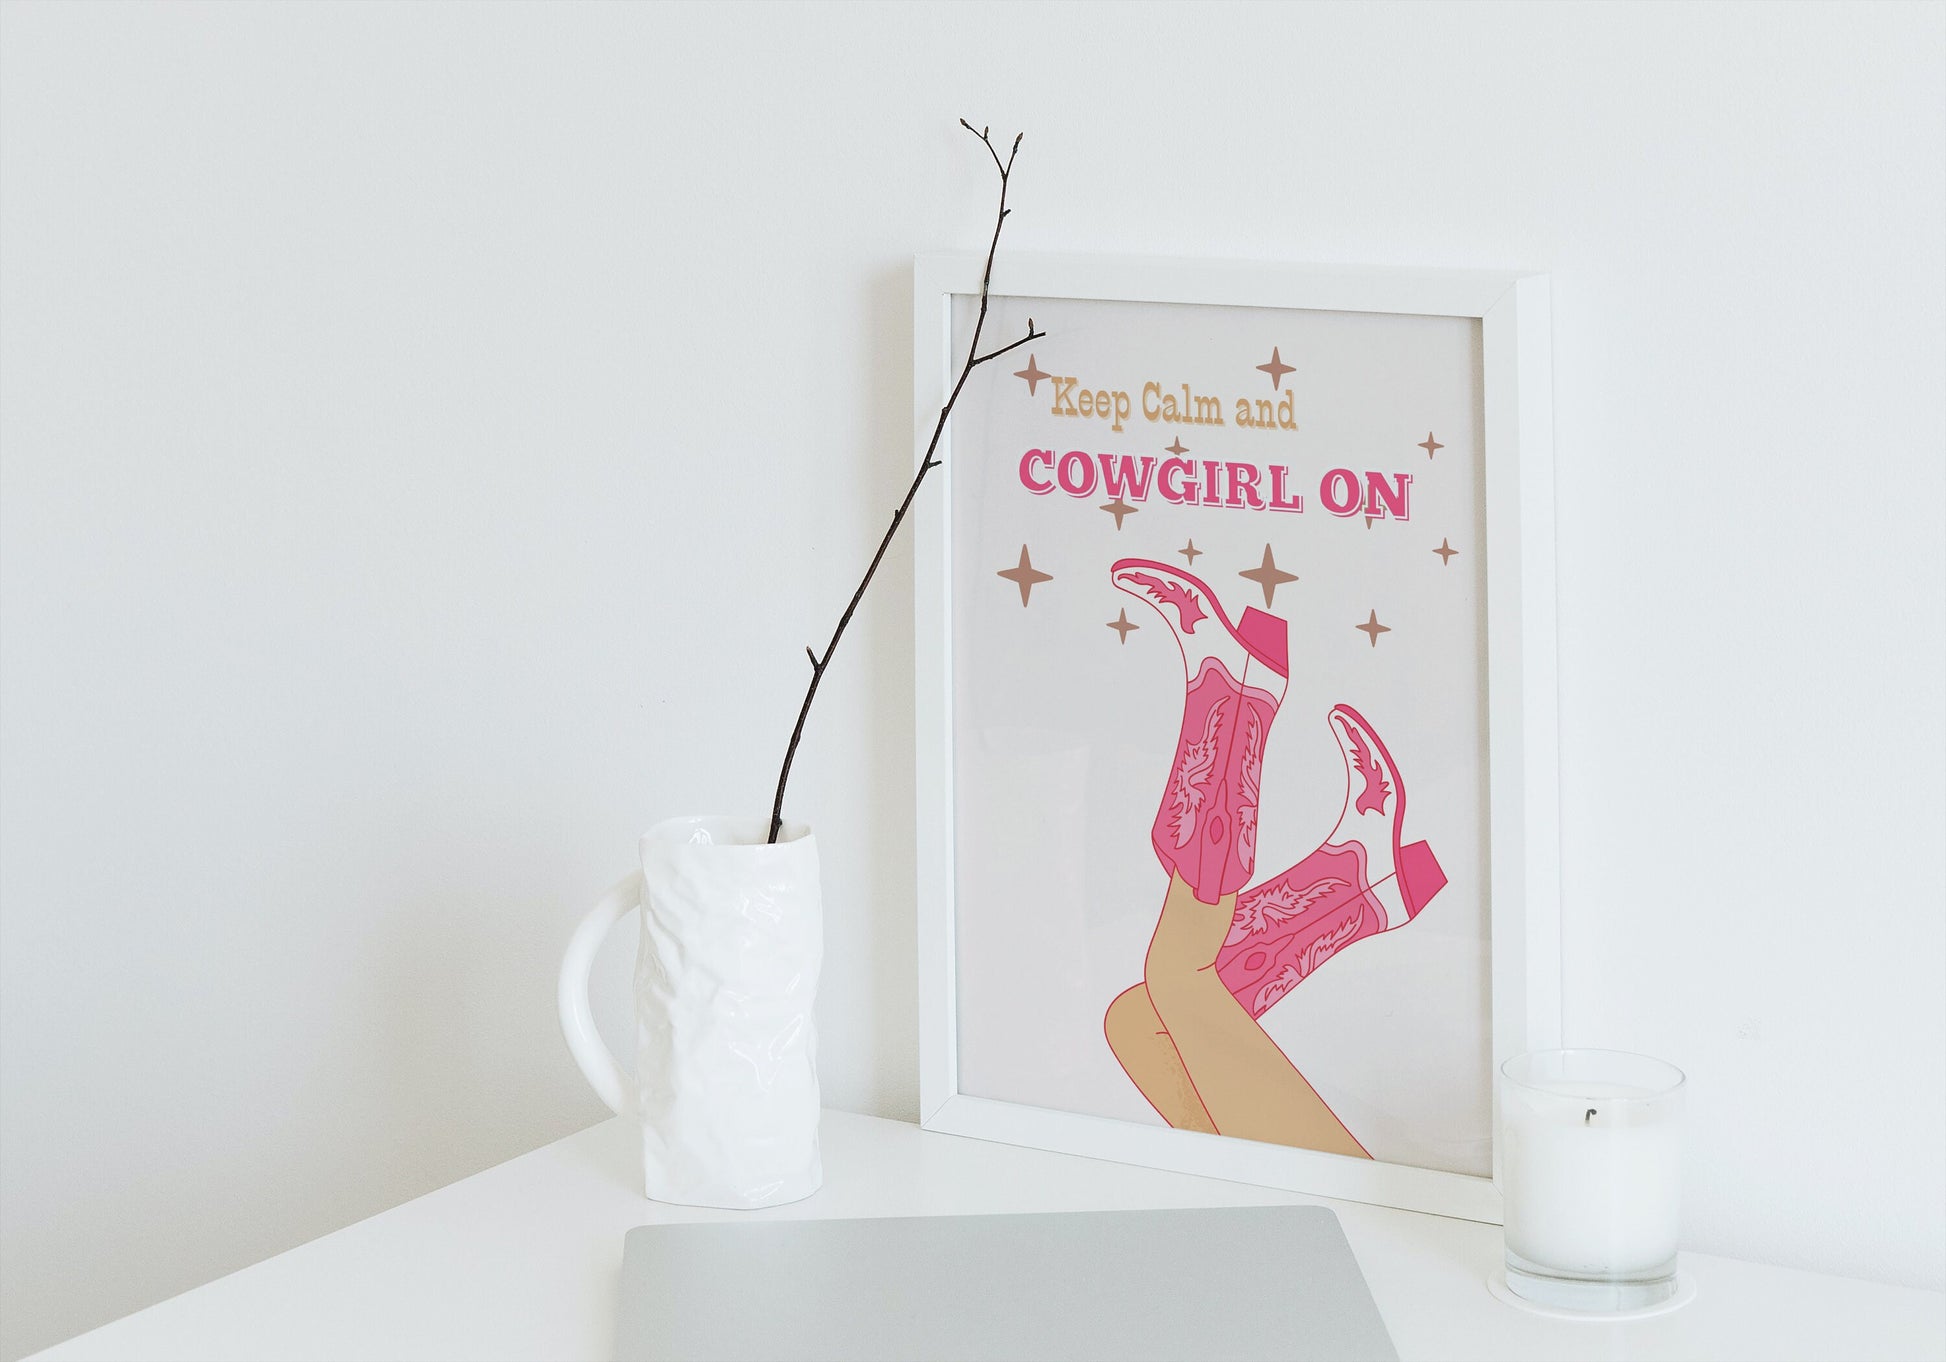 Keep Calm and Cowgirl On Set of 2 DIGITAL PRINTS, Light Pink Wall Art, Western Art Posters, Academia aesthetic, Pink Boots, cowgirl poster